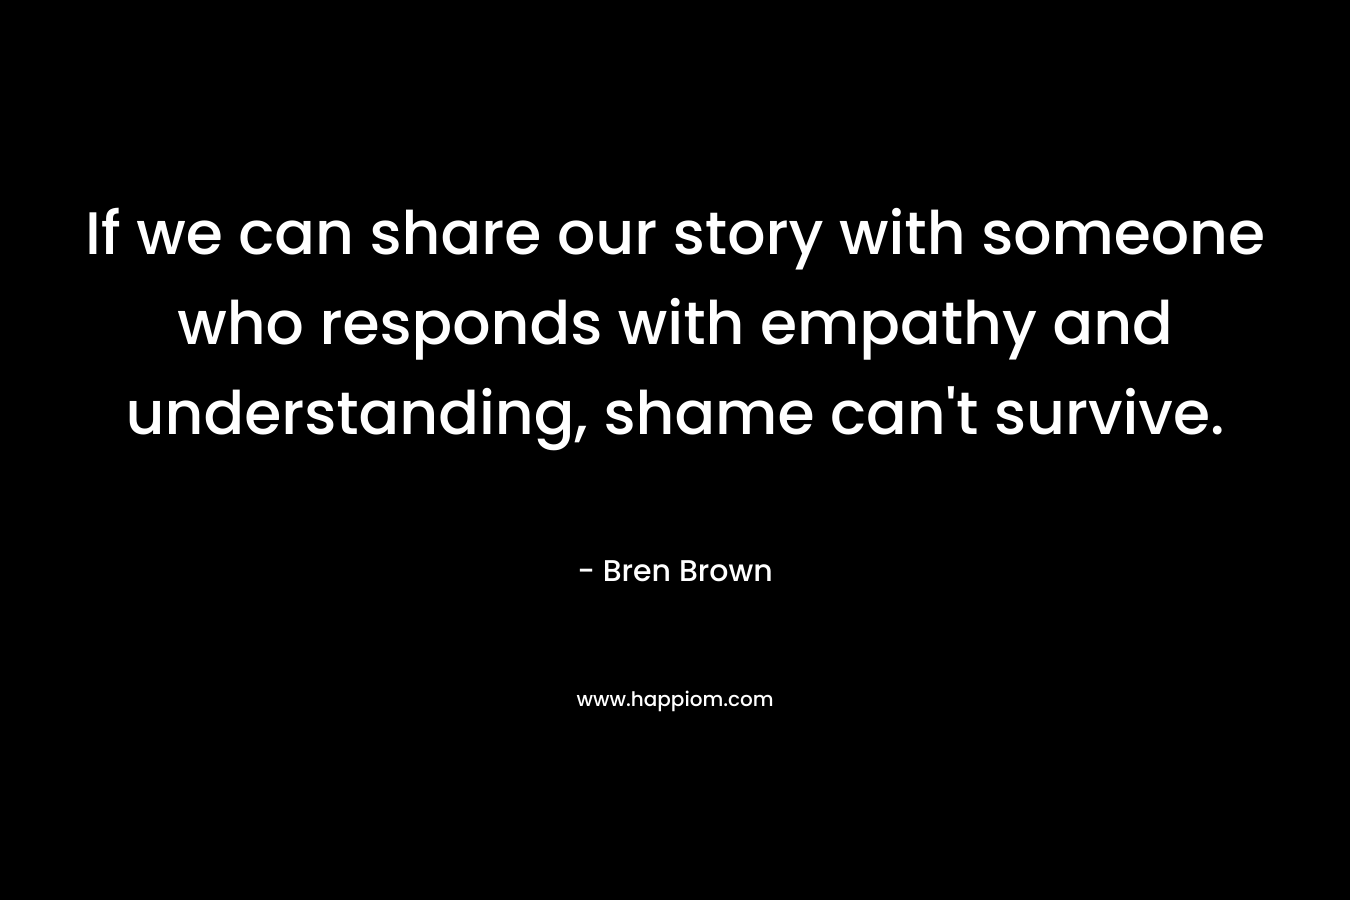 If we can share our story with someone who responds with empathy and understanding, shame can’t survive. – Bren Brown